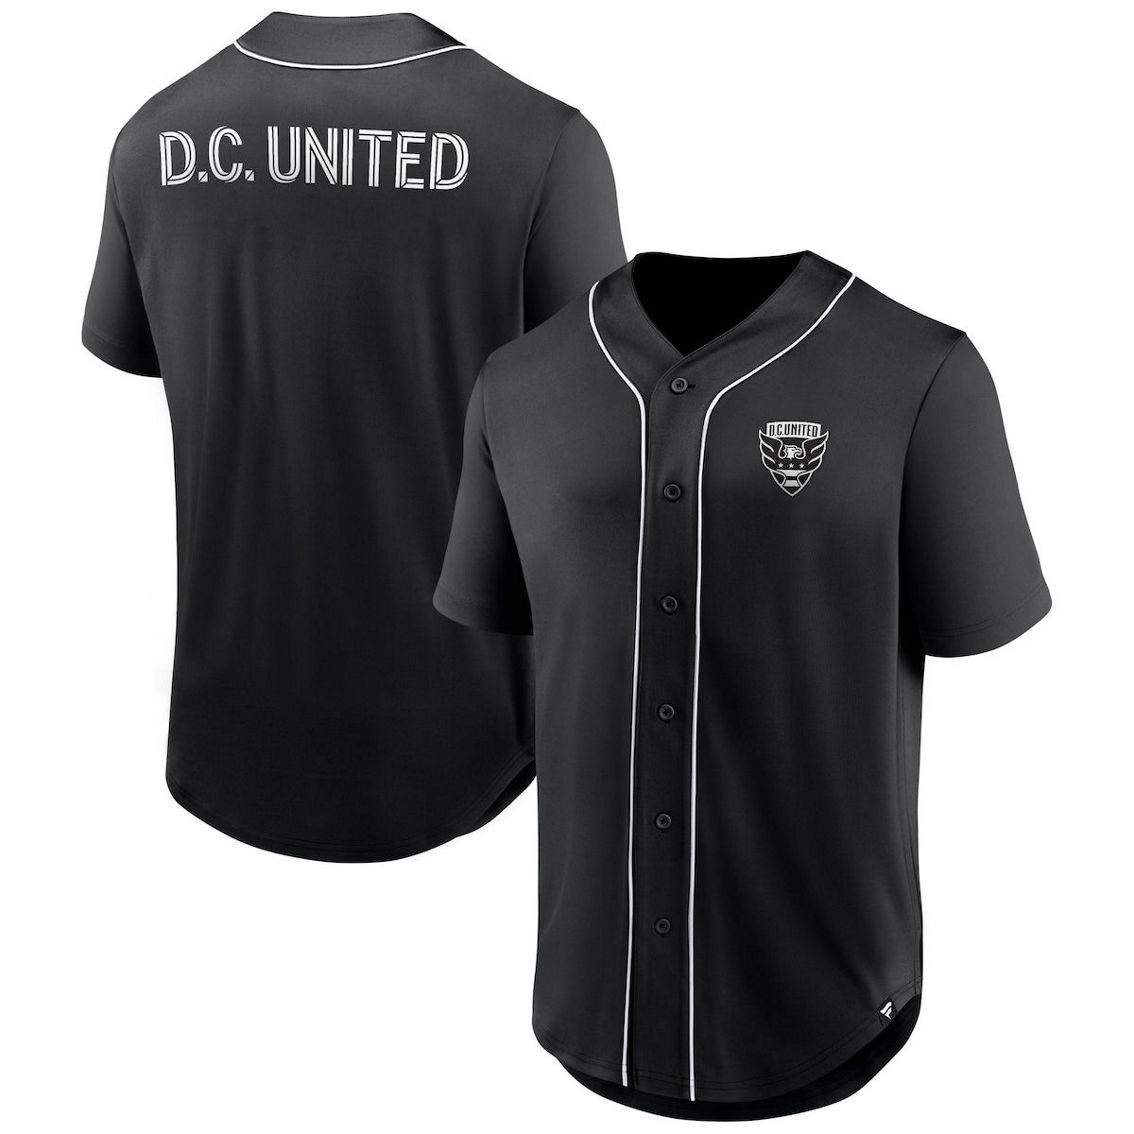 Fanatics Branded Men's Black D.C. United Third Period Fashion Baseball Button-Up Jersey - Image 2 of 4